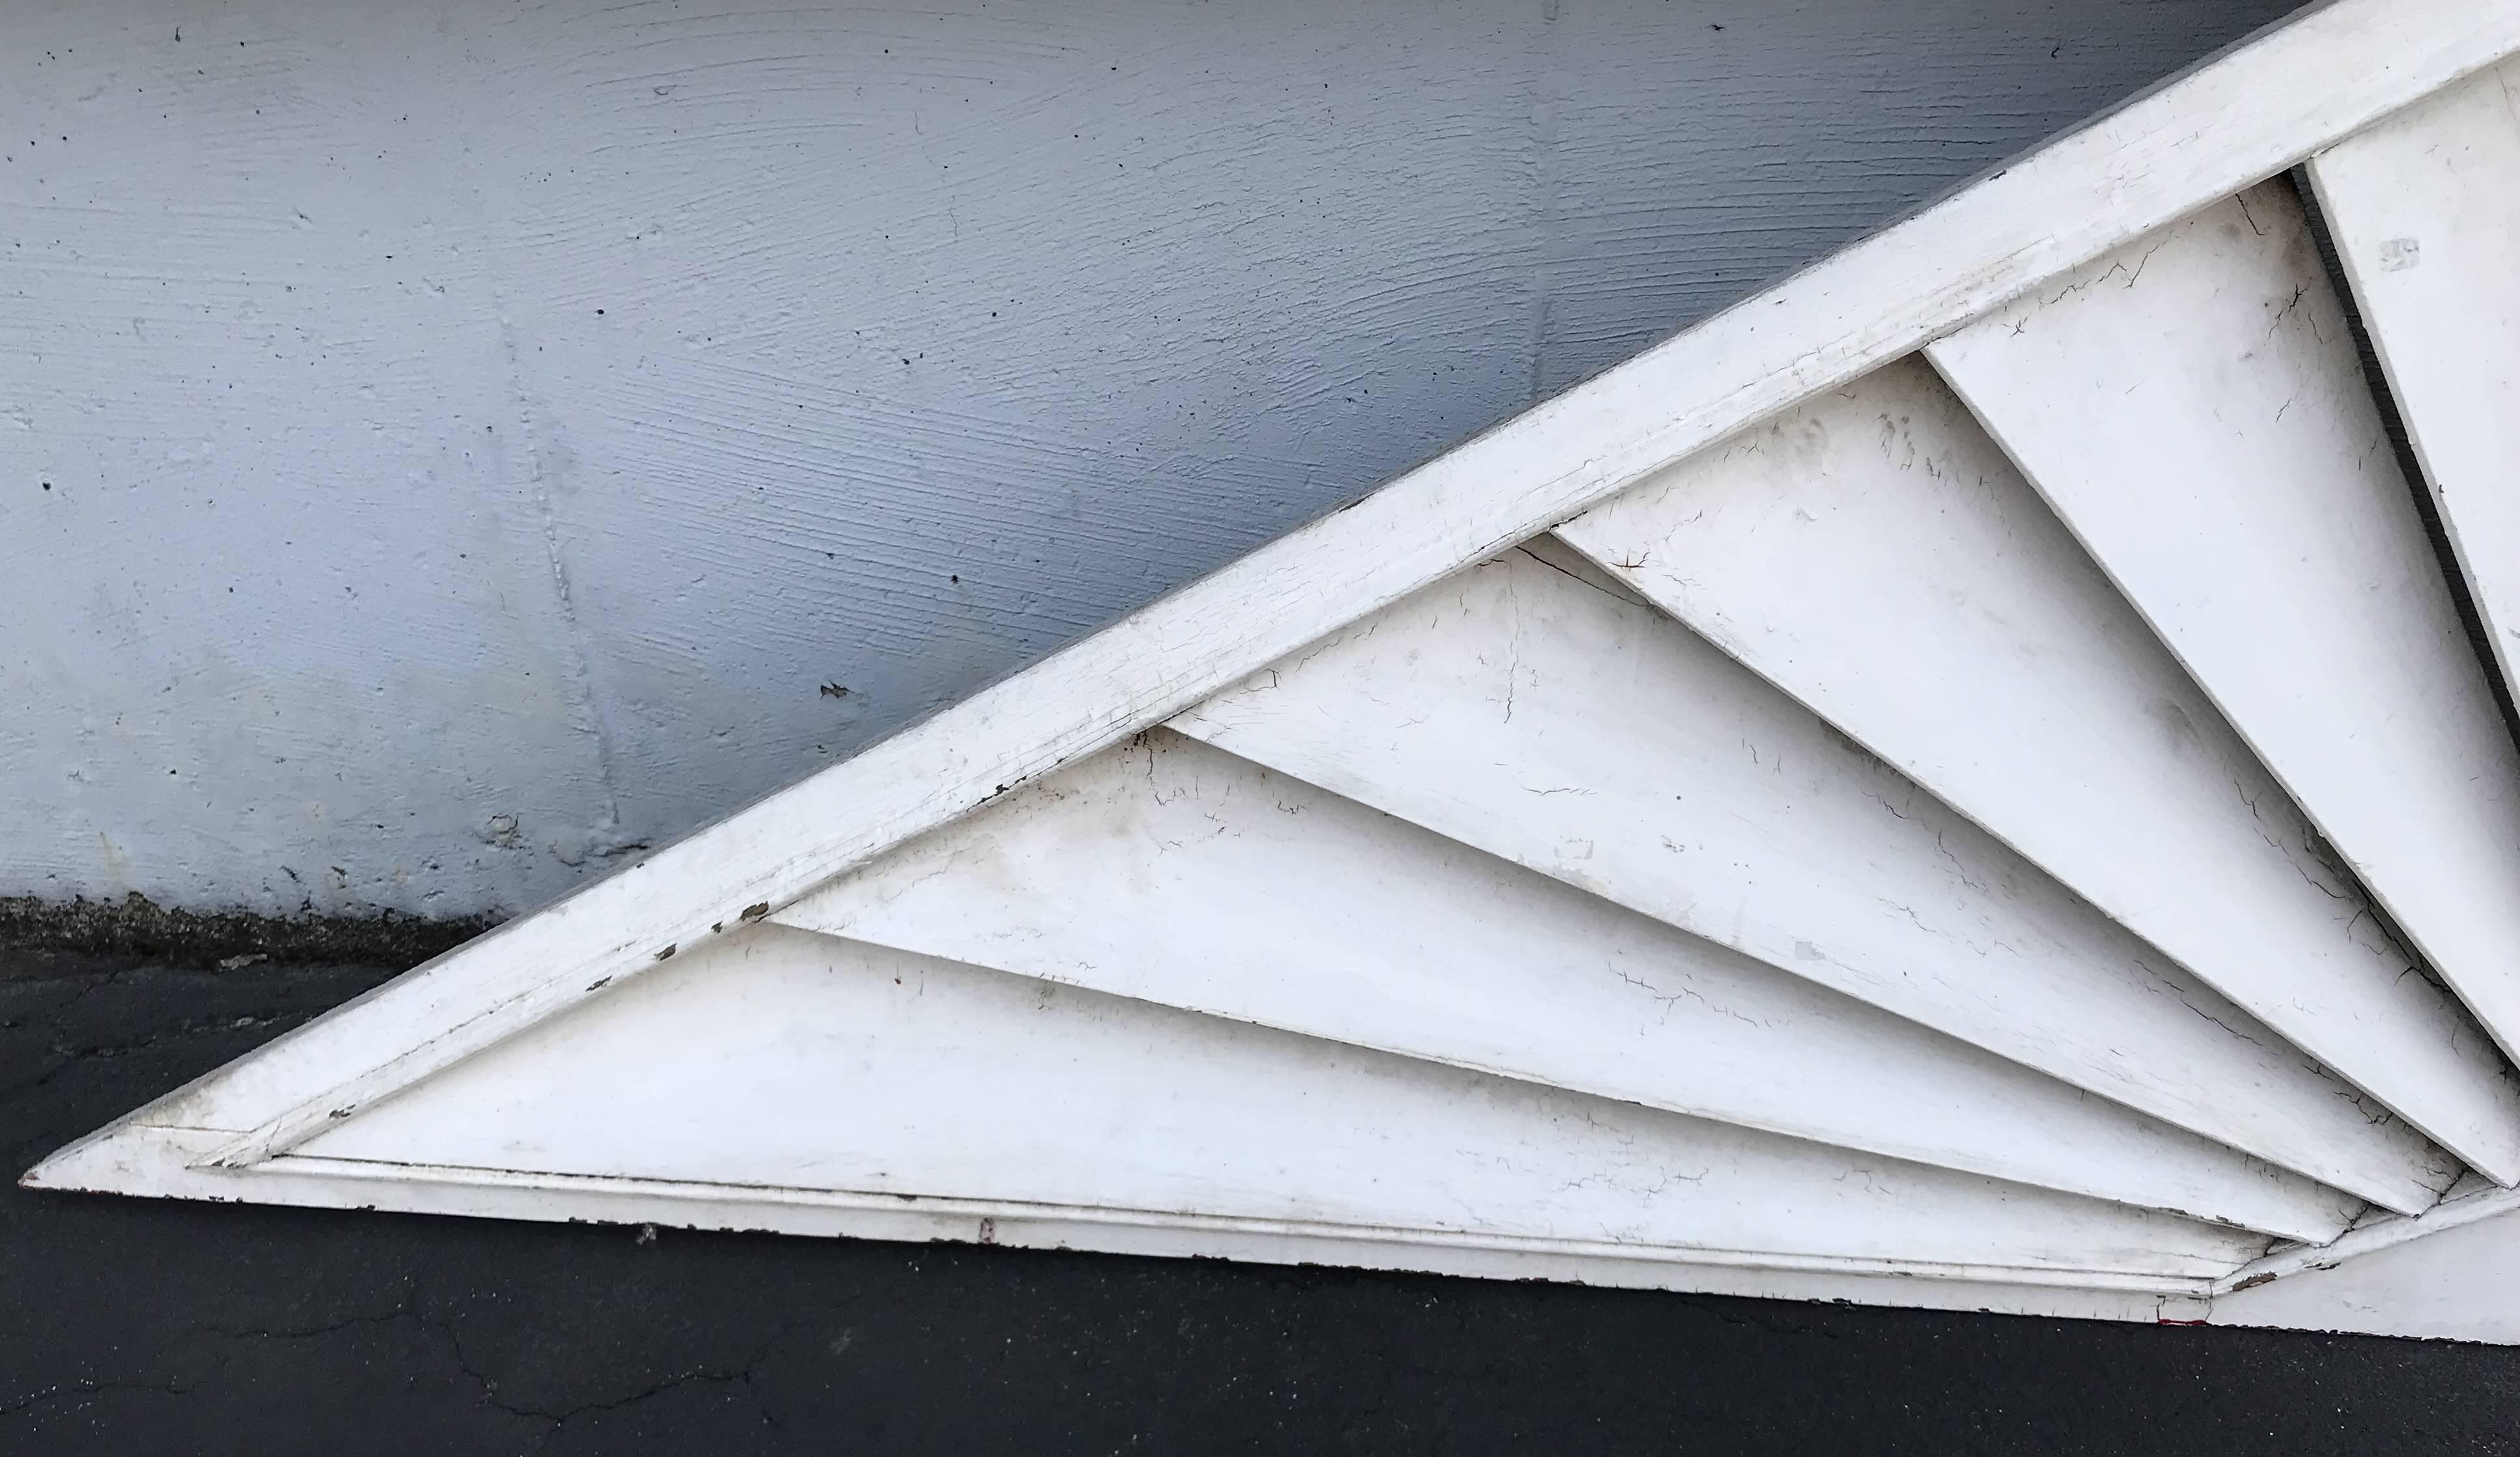 A splendid triangle form architectural transom or door fan with wooden louvers in a sunburst pattern with a molded edge surround, probably dating to the late 19th or early 20th century in white paint, with remnants of gray and red undercoats in very